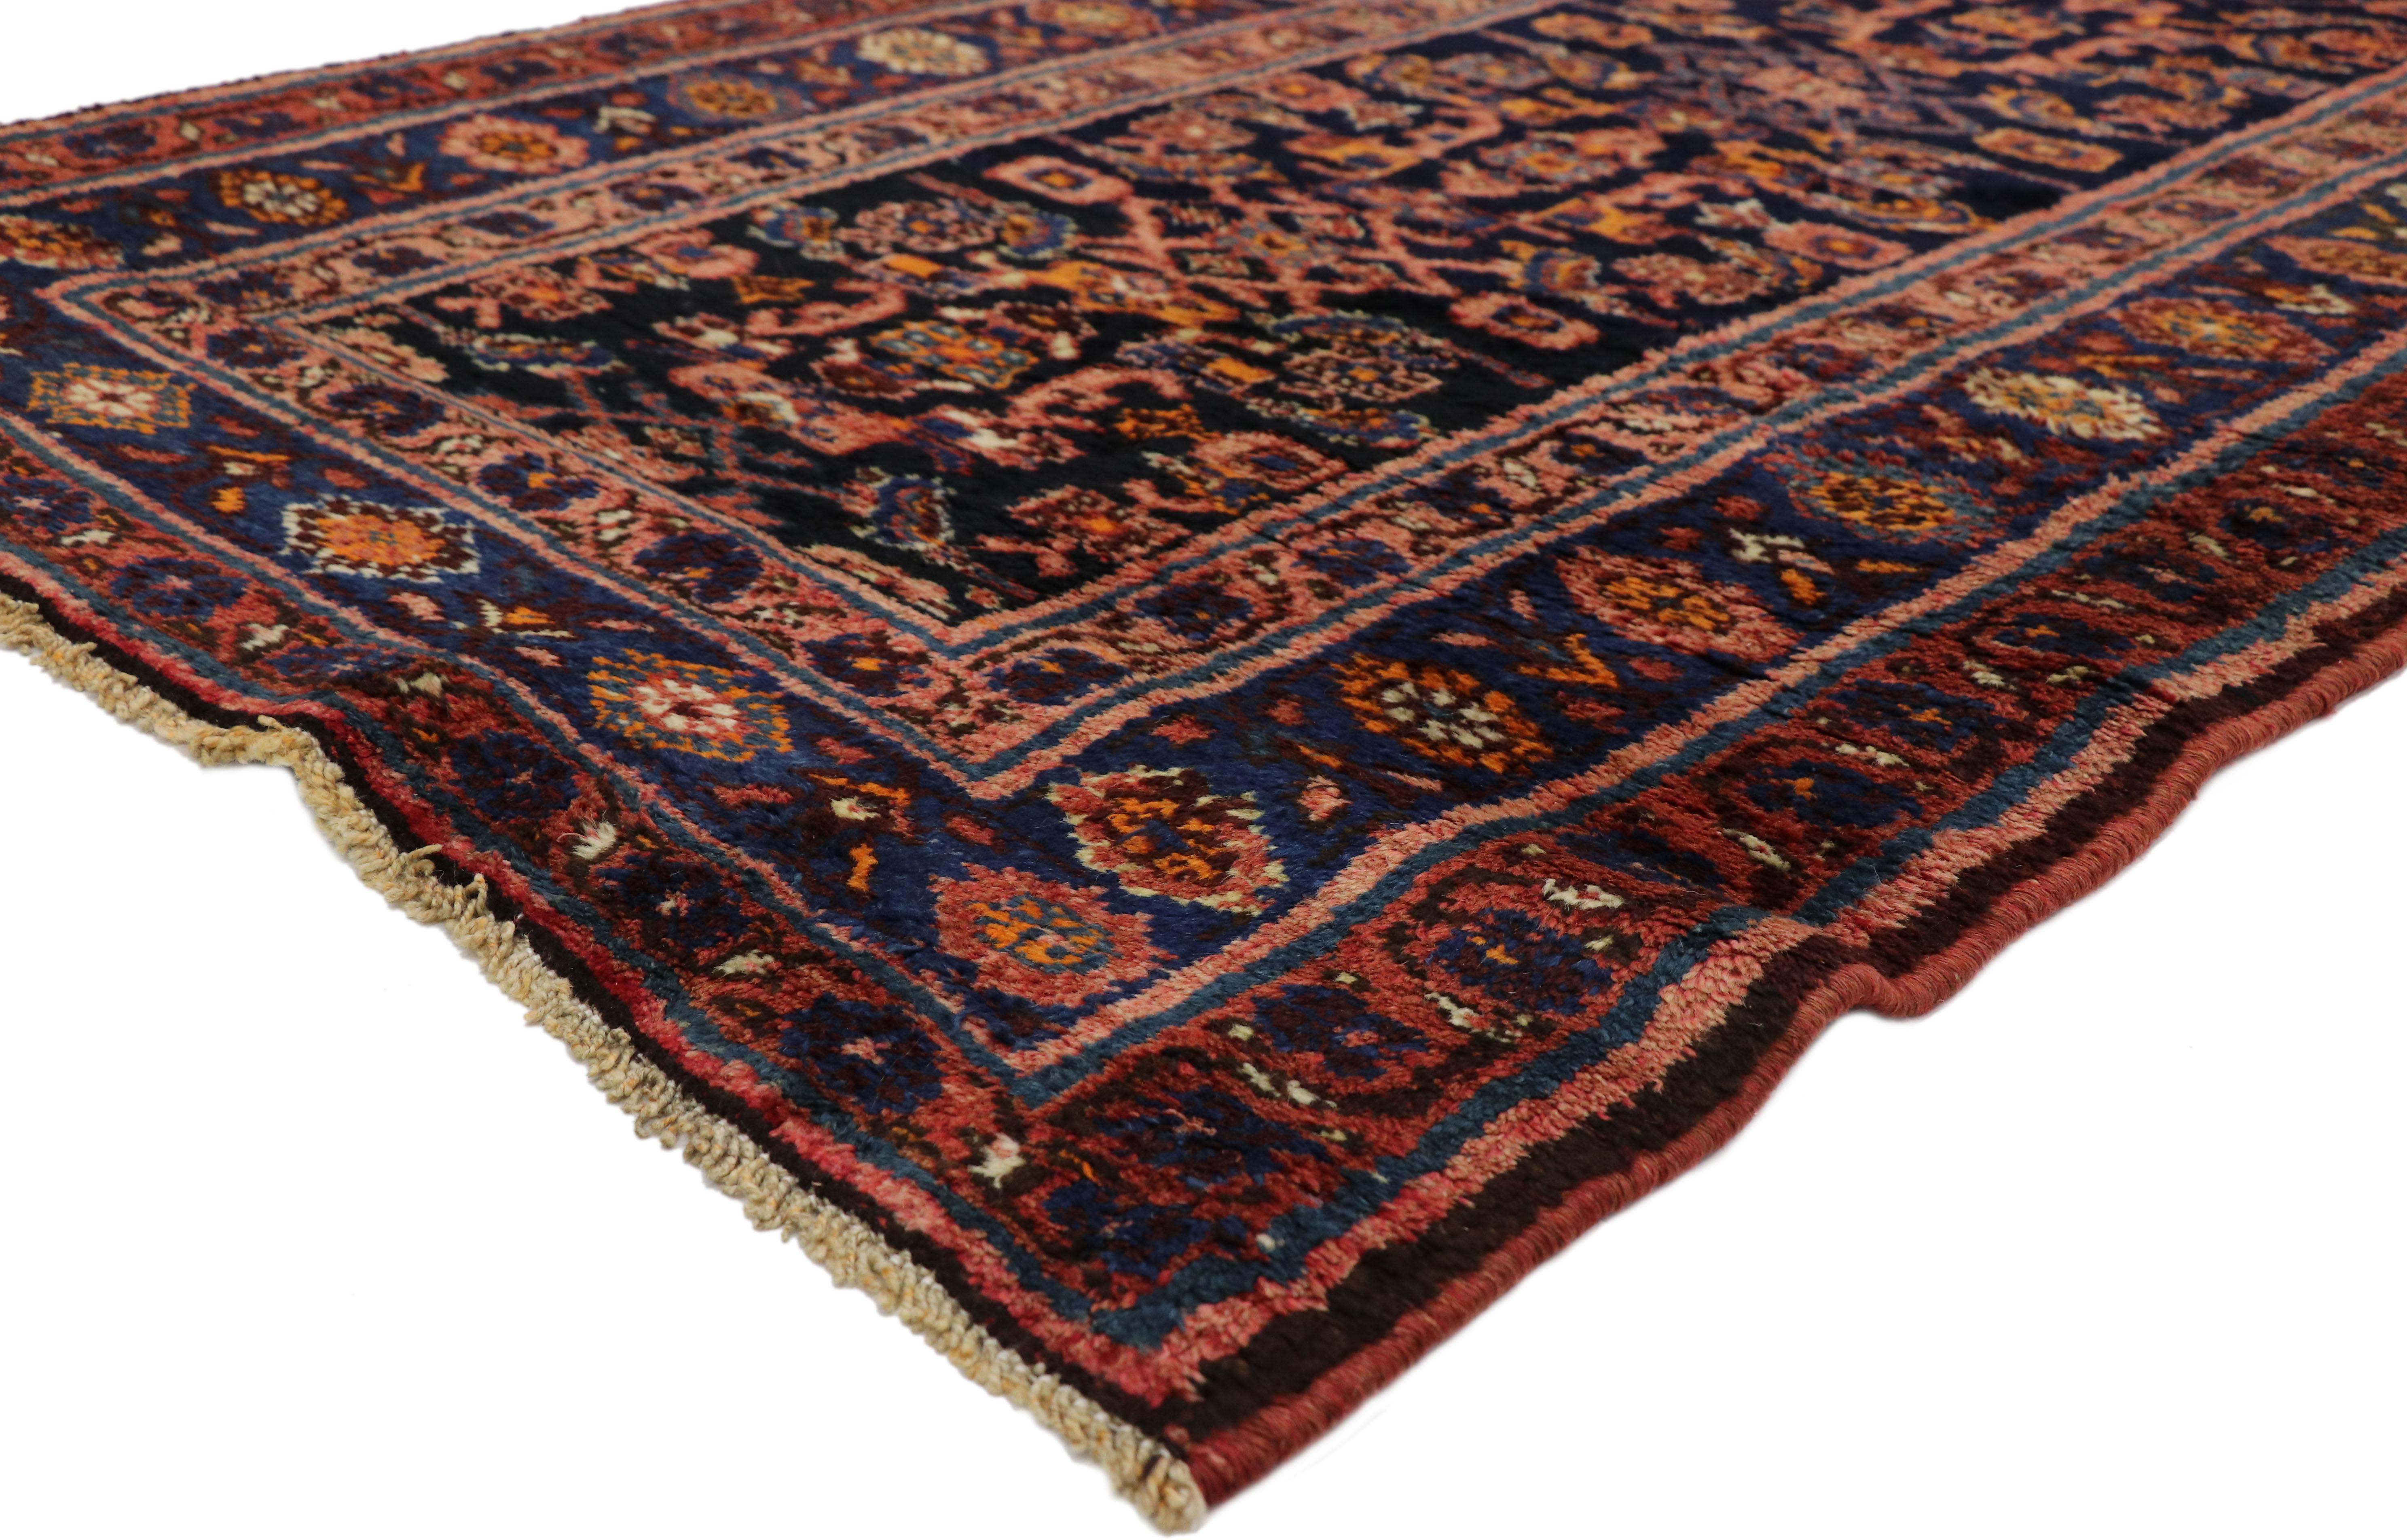 75905 Late 19th-Century Antique Persian Kurd Runner with Modern Victorian Style. Full of character and stately presence, this antique Persian Kurd carpet runner showcase an intrinsic geometric pattern highlighting the infamous Herati design. The